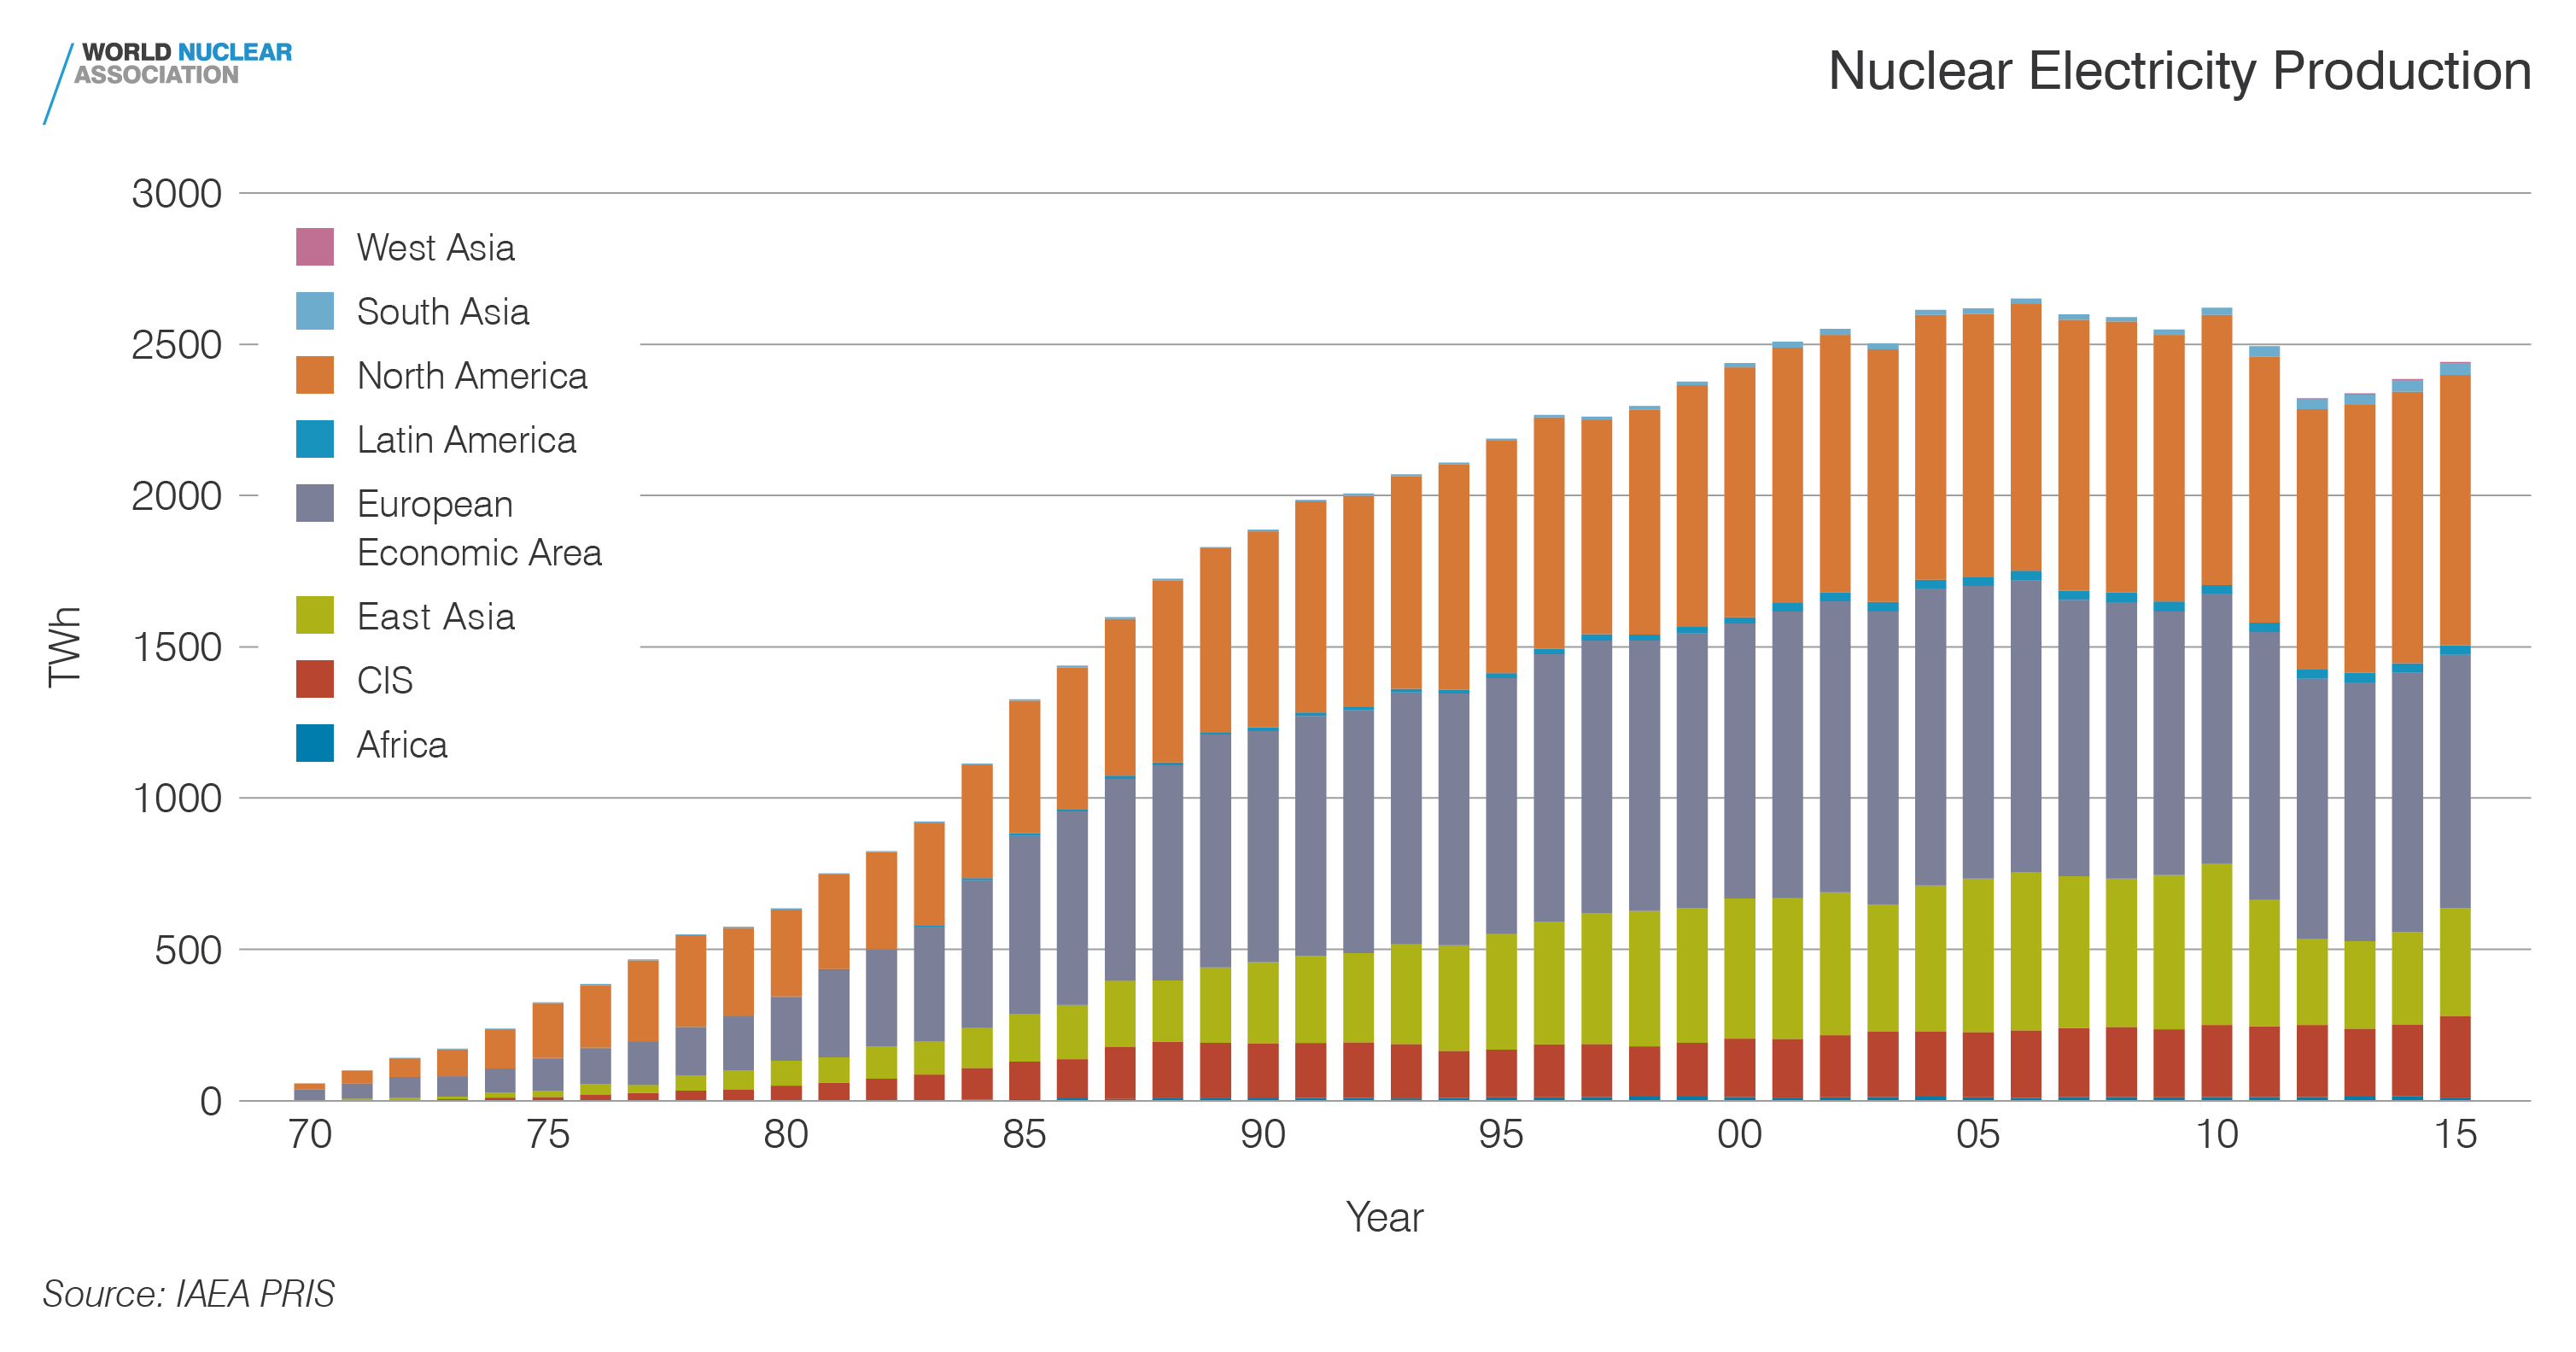 Nuclear electricity production by region